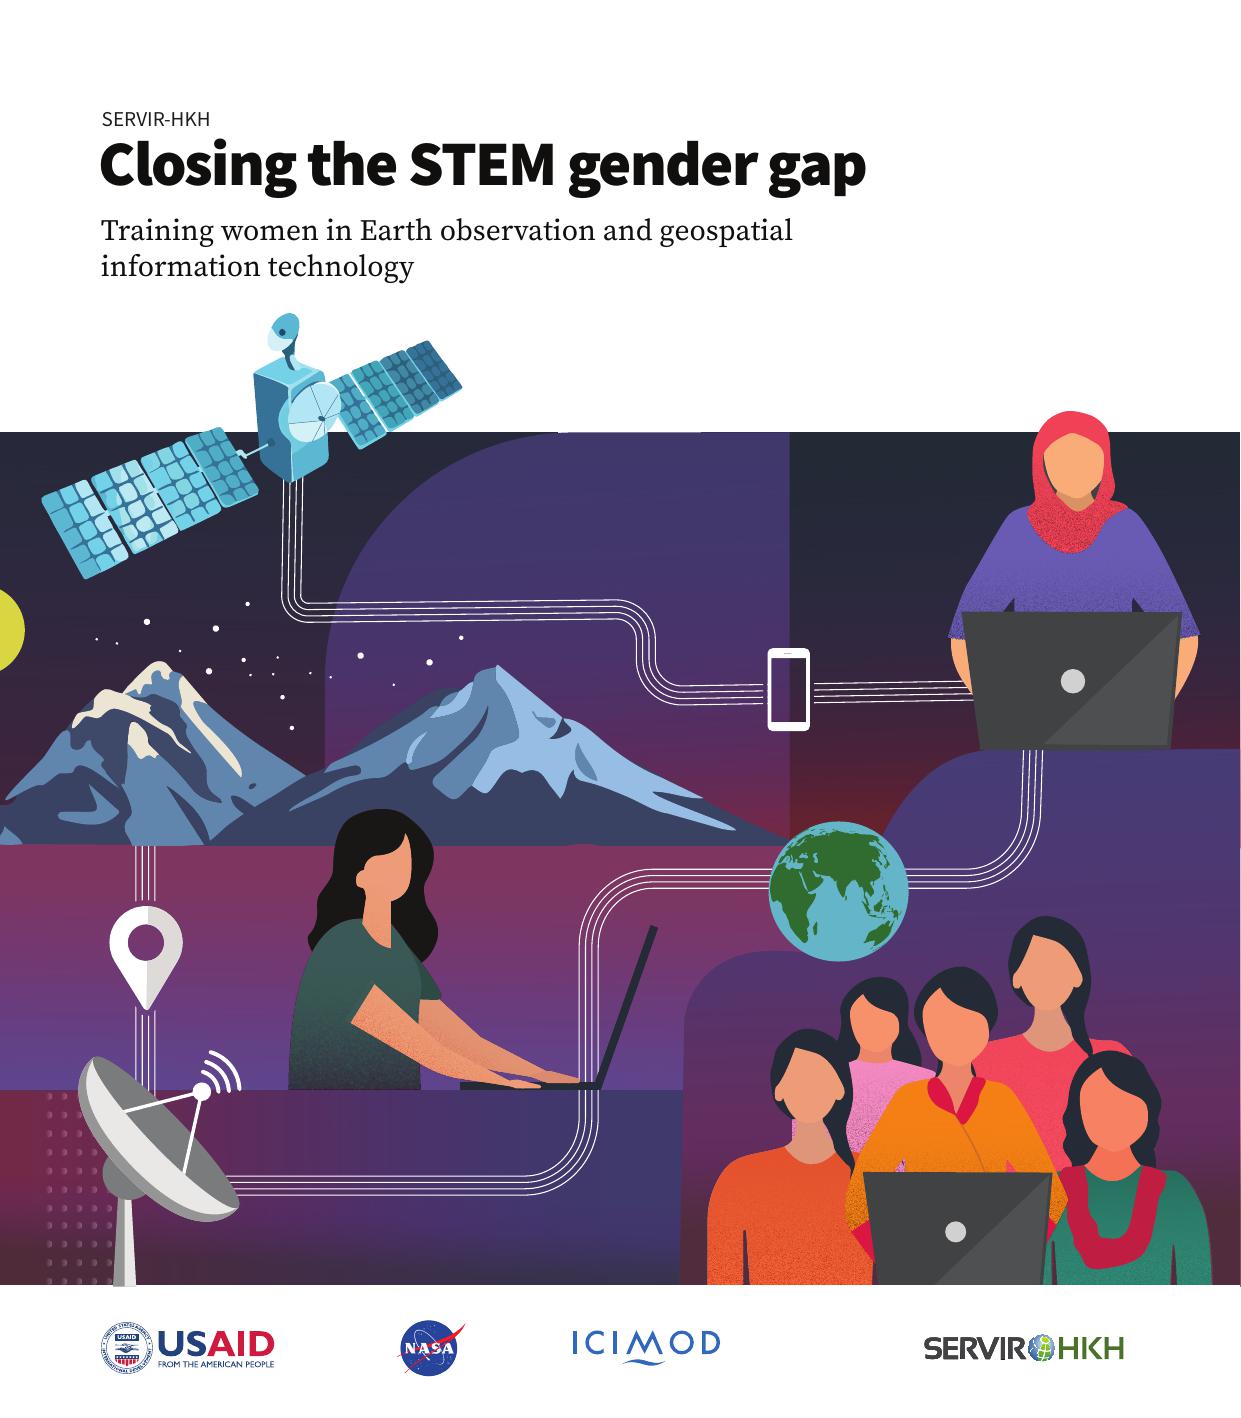 Closing the STEM gender gap: Training women in Earth observation and geospatial information technology